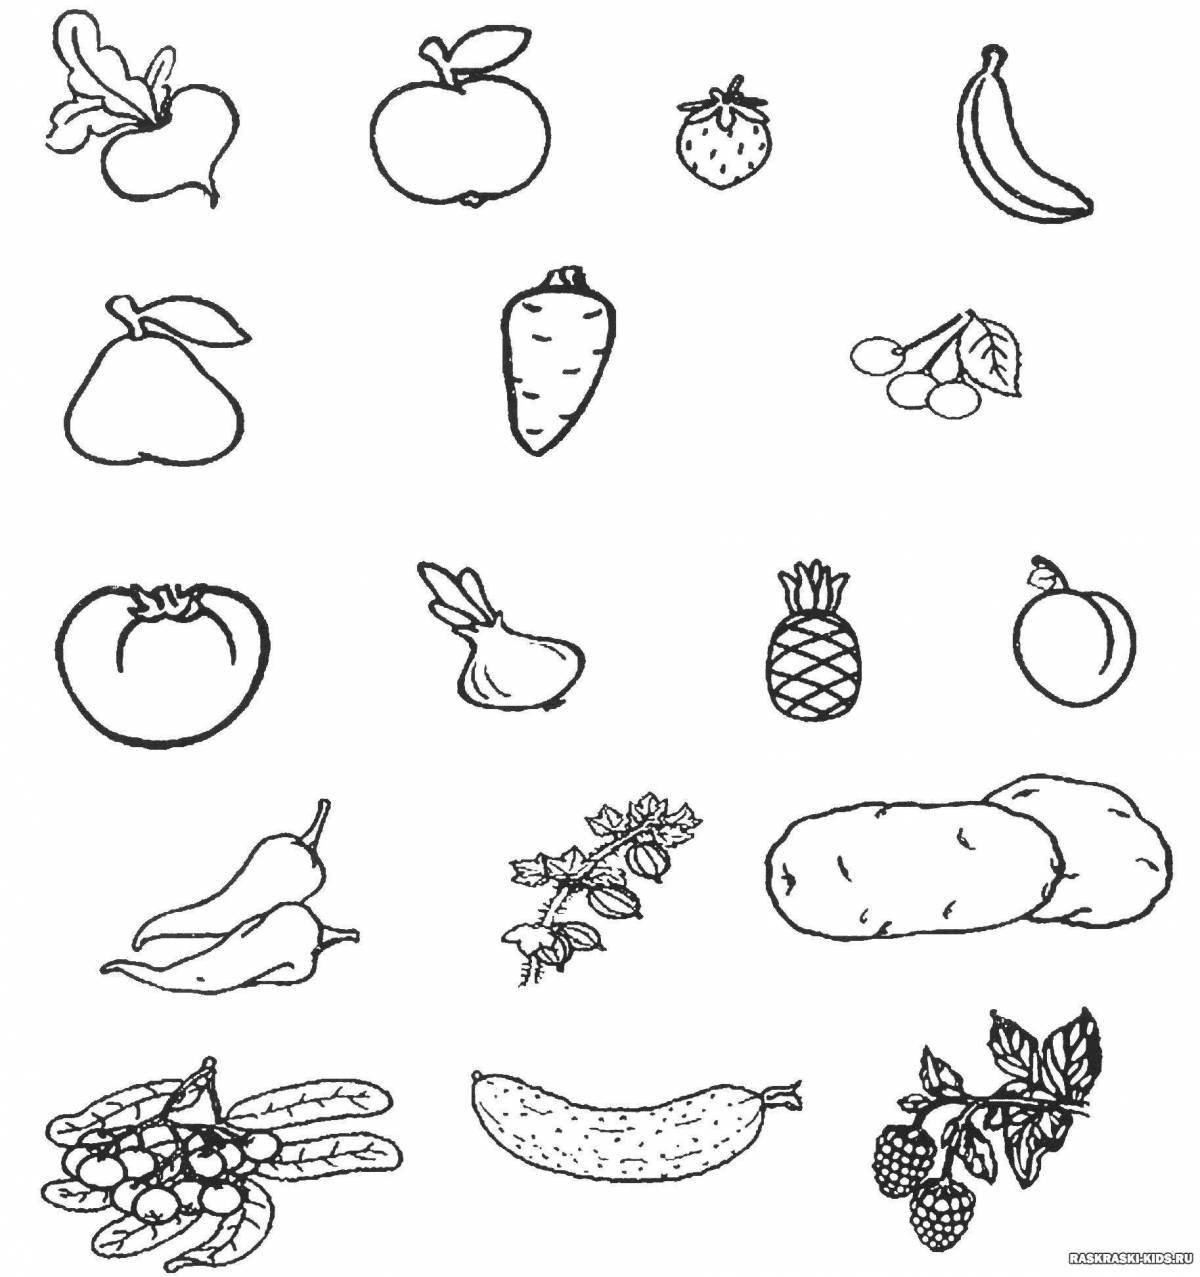 Fun coloring fruits and vegetables